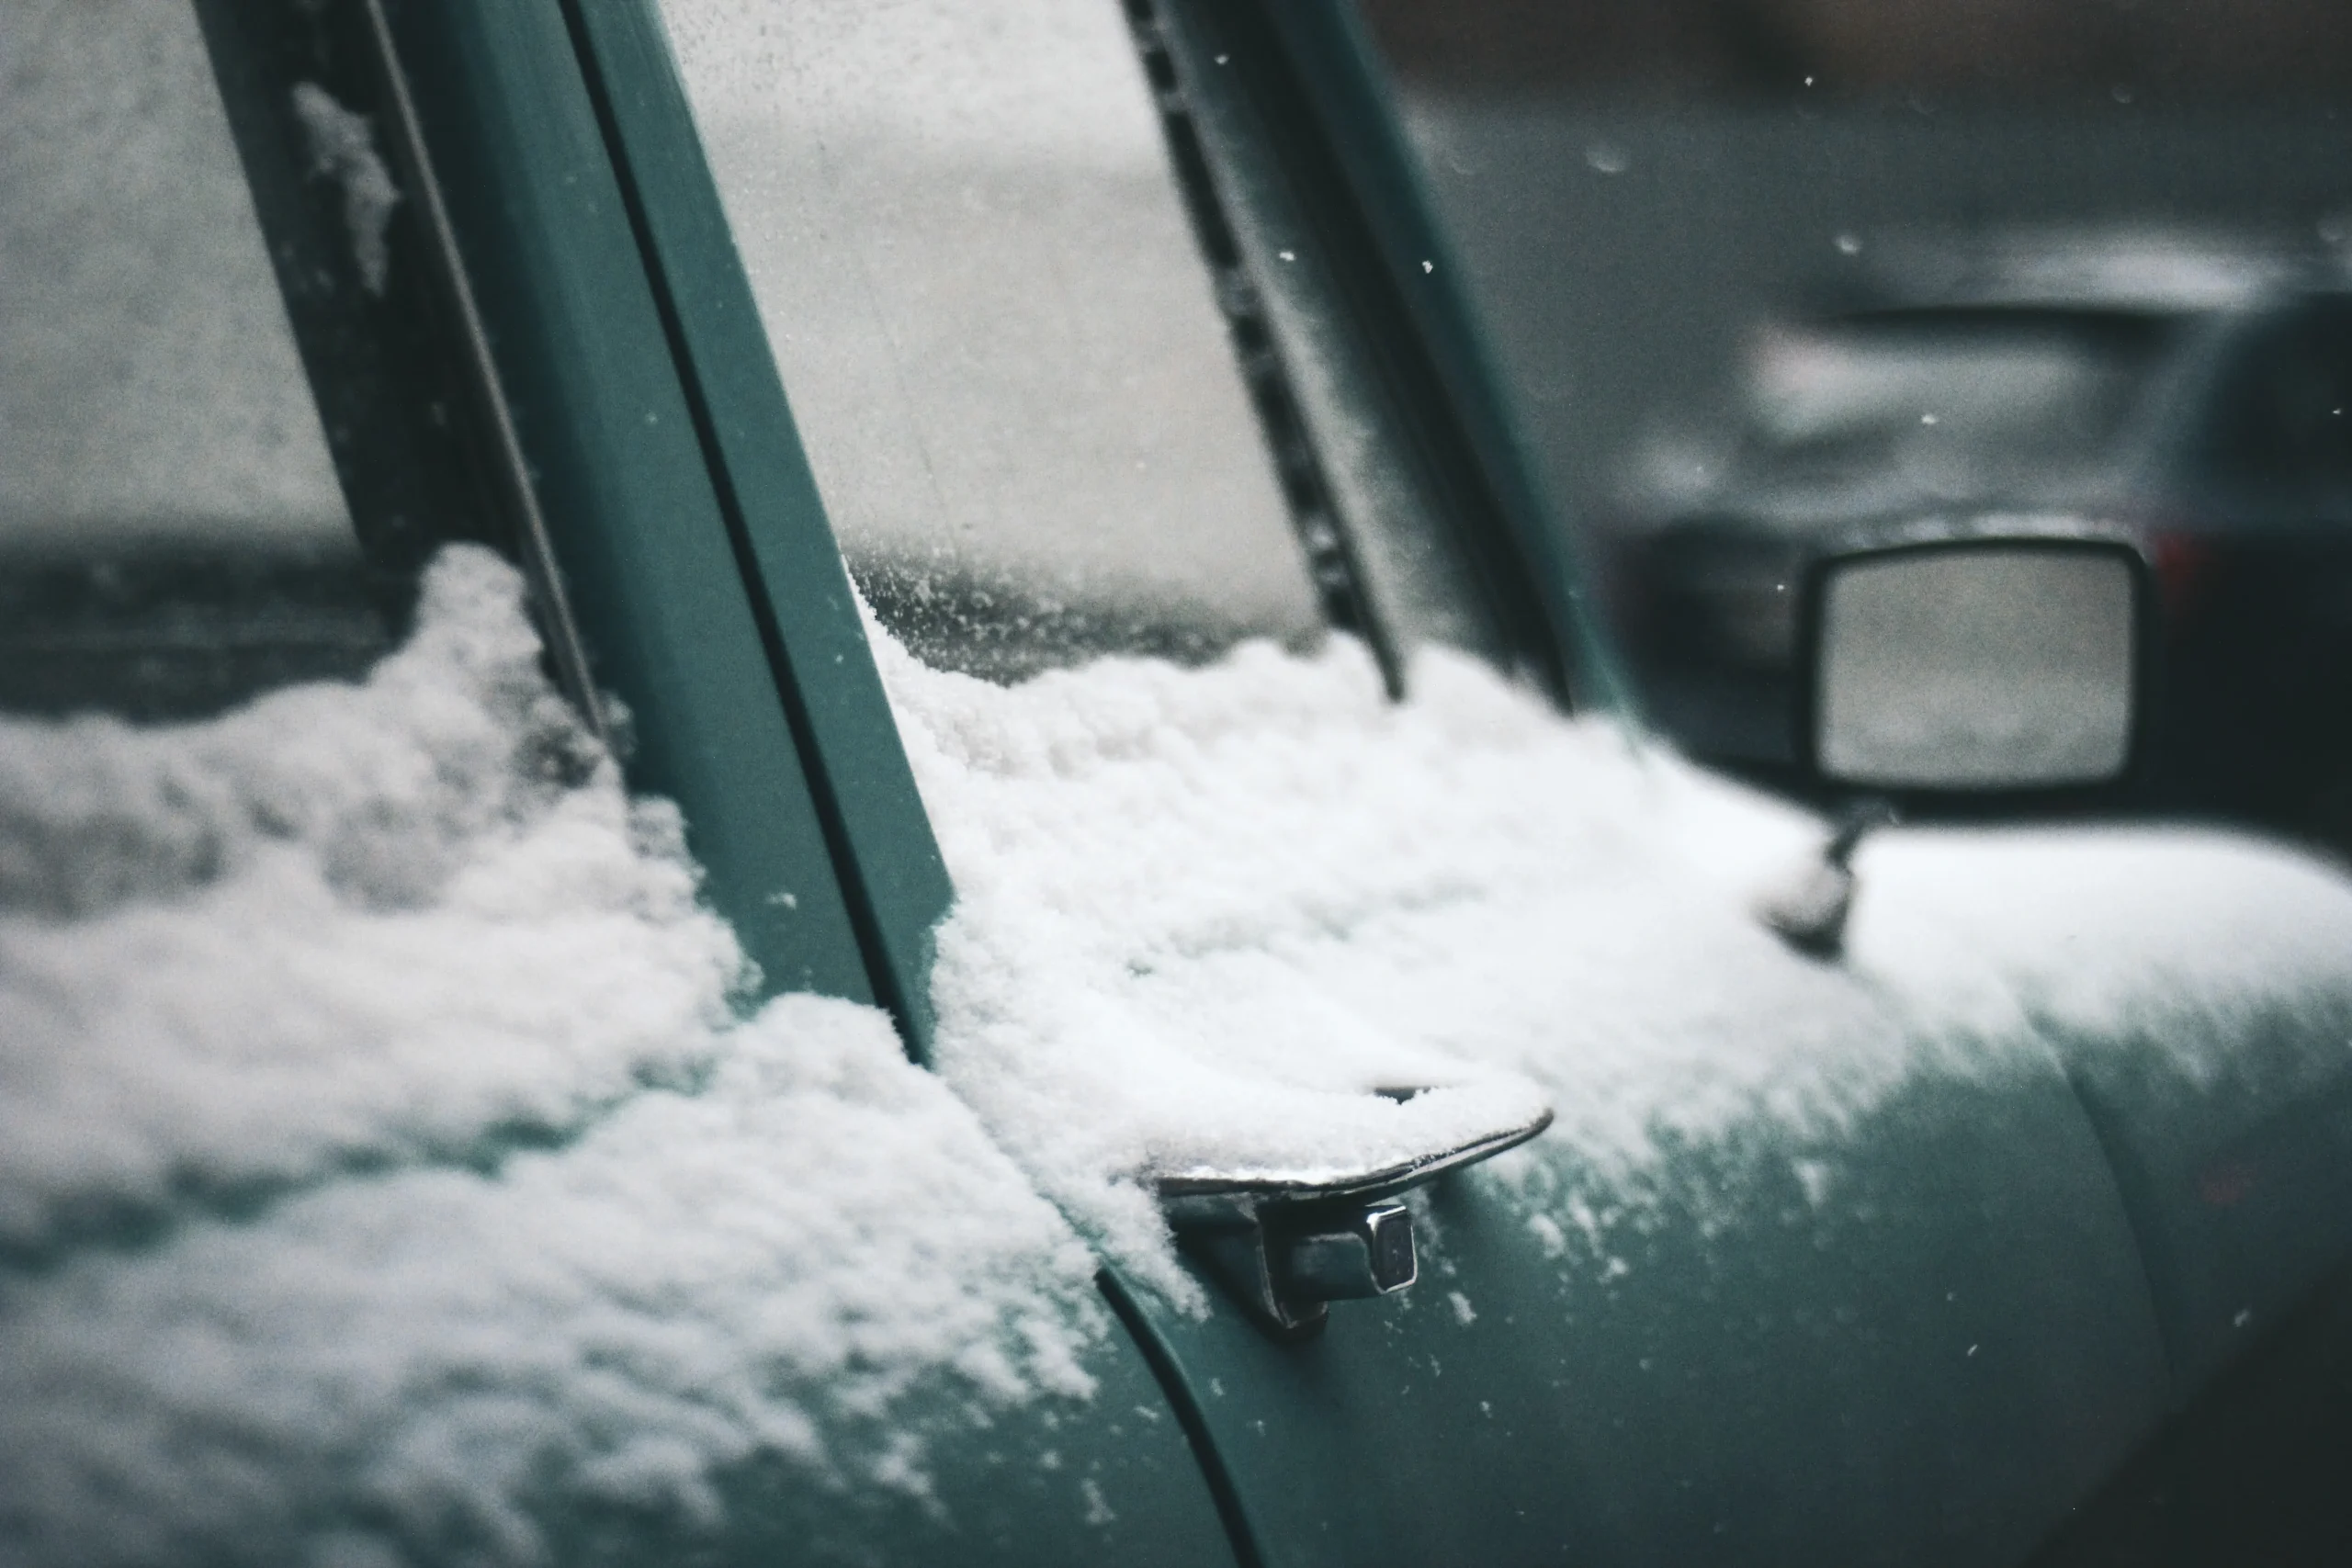 Close-up view of a car with snow-covered exterior, captured from a side door angle.